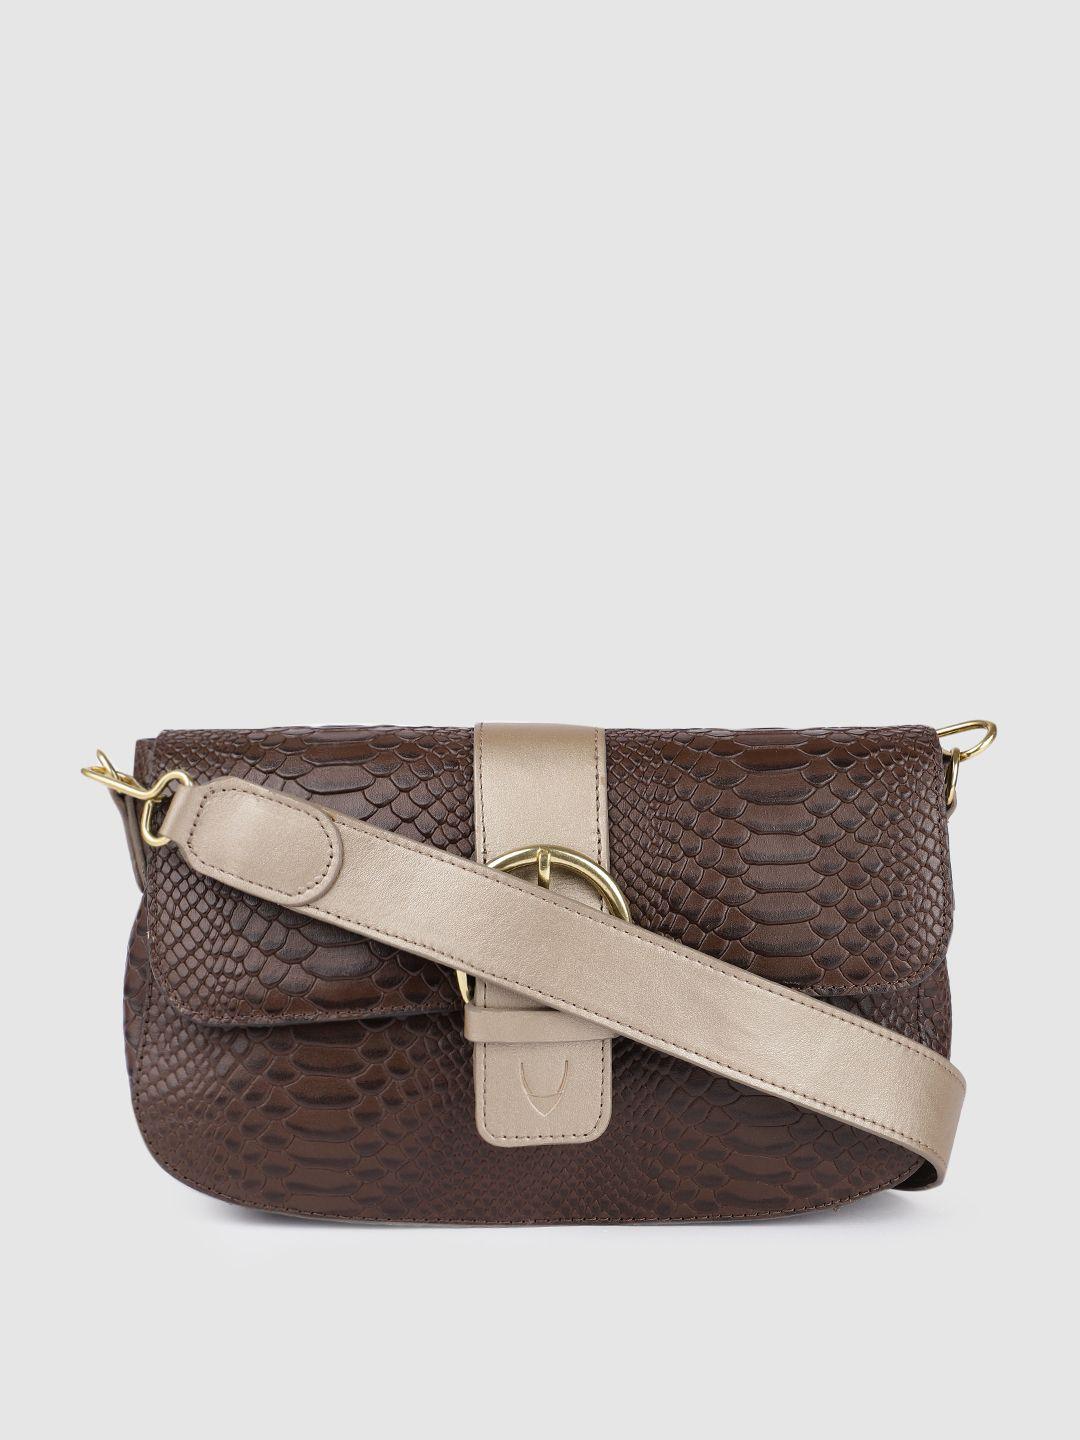 hidesign women brown textured leather sling bag